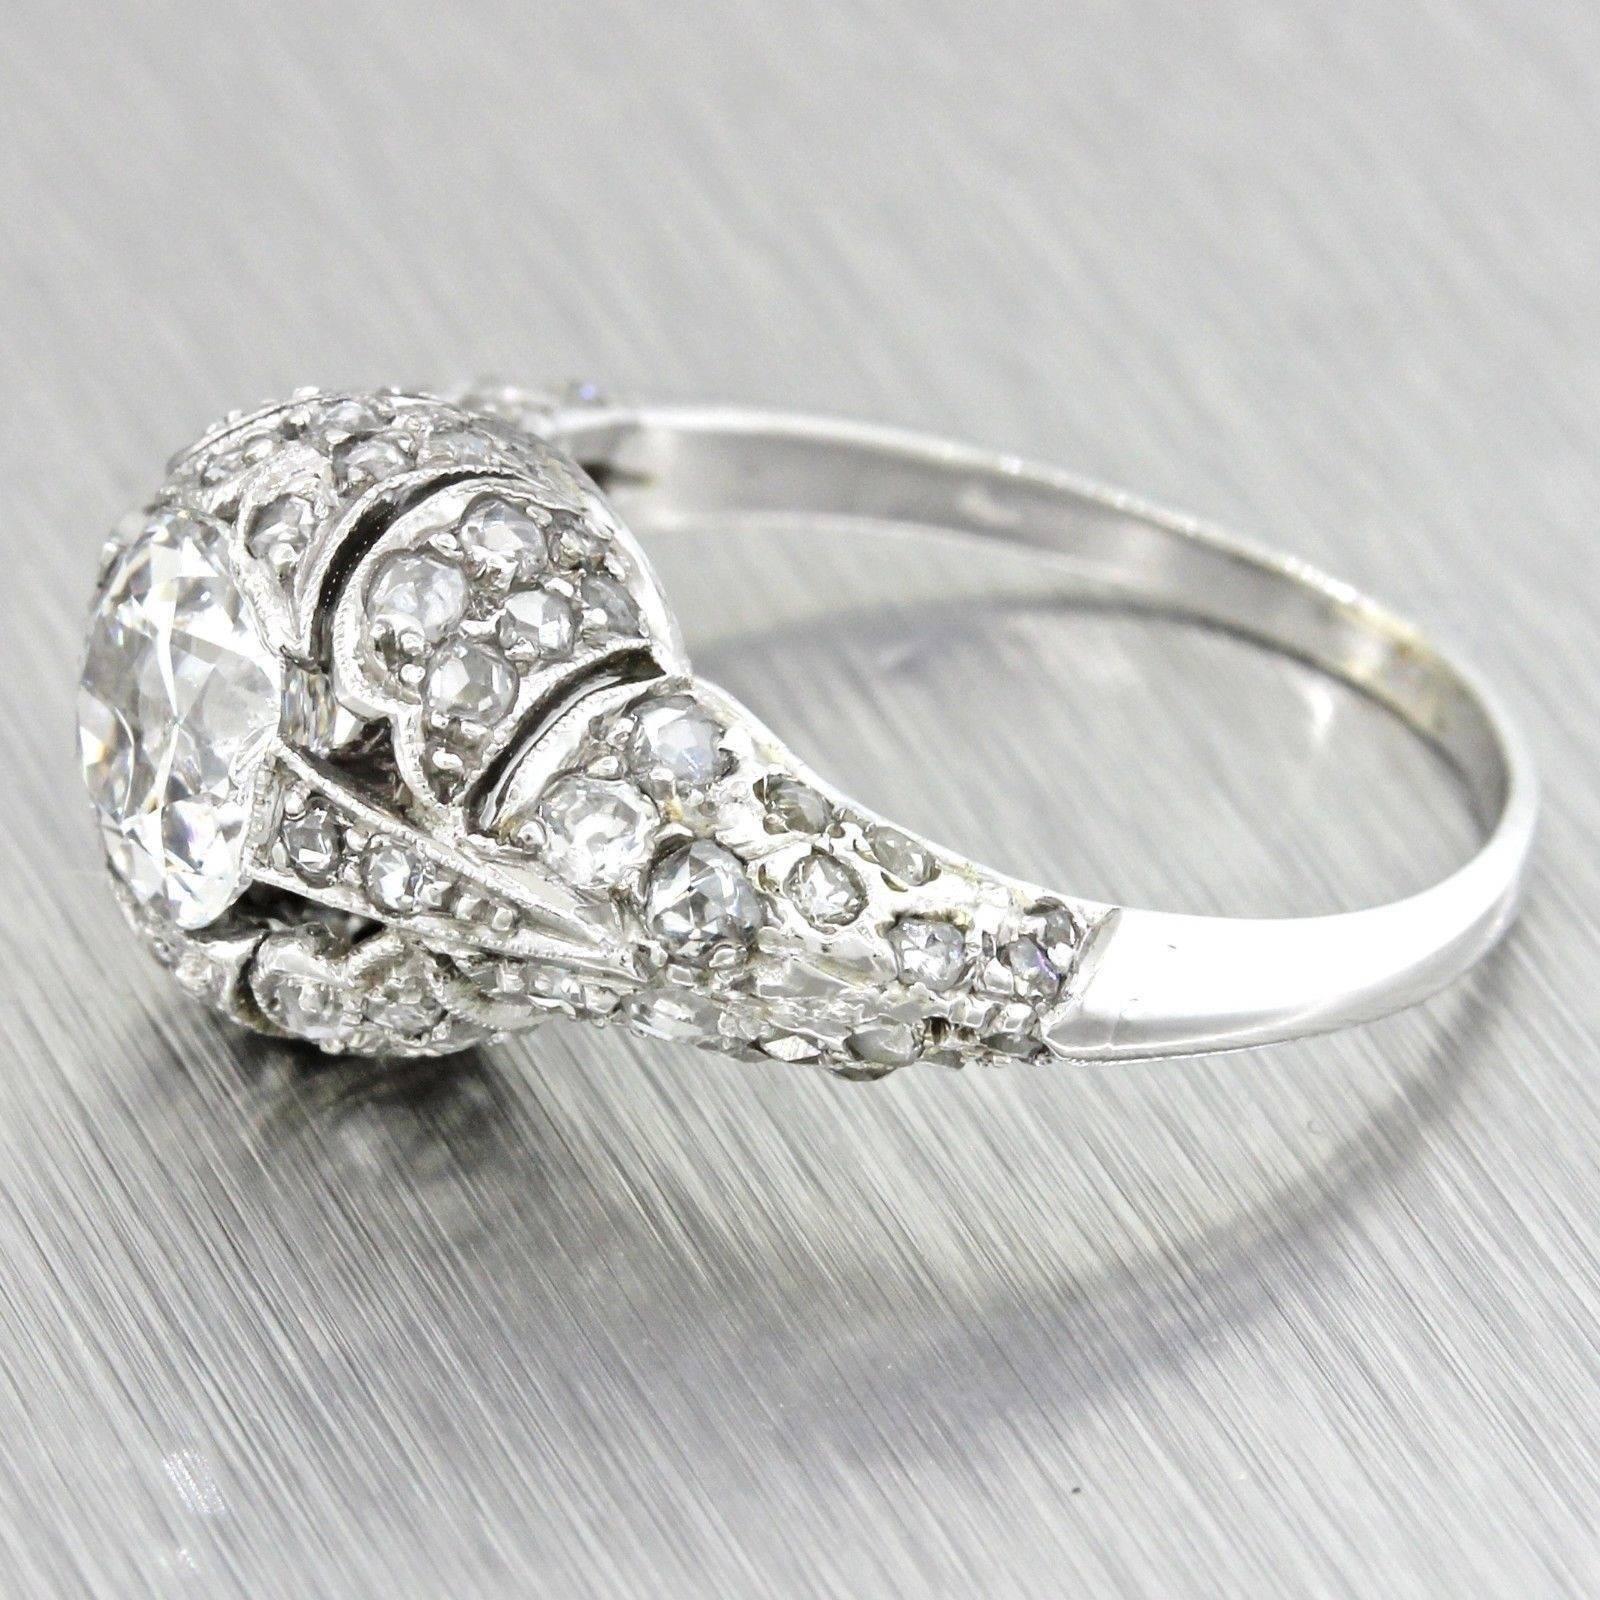 1920s Antique Art Deco  1.29 carat GIA Diamond Platinum Engagement Ring In Excellent Condition For Sale In Huntington, NY